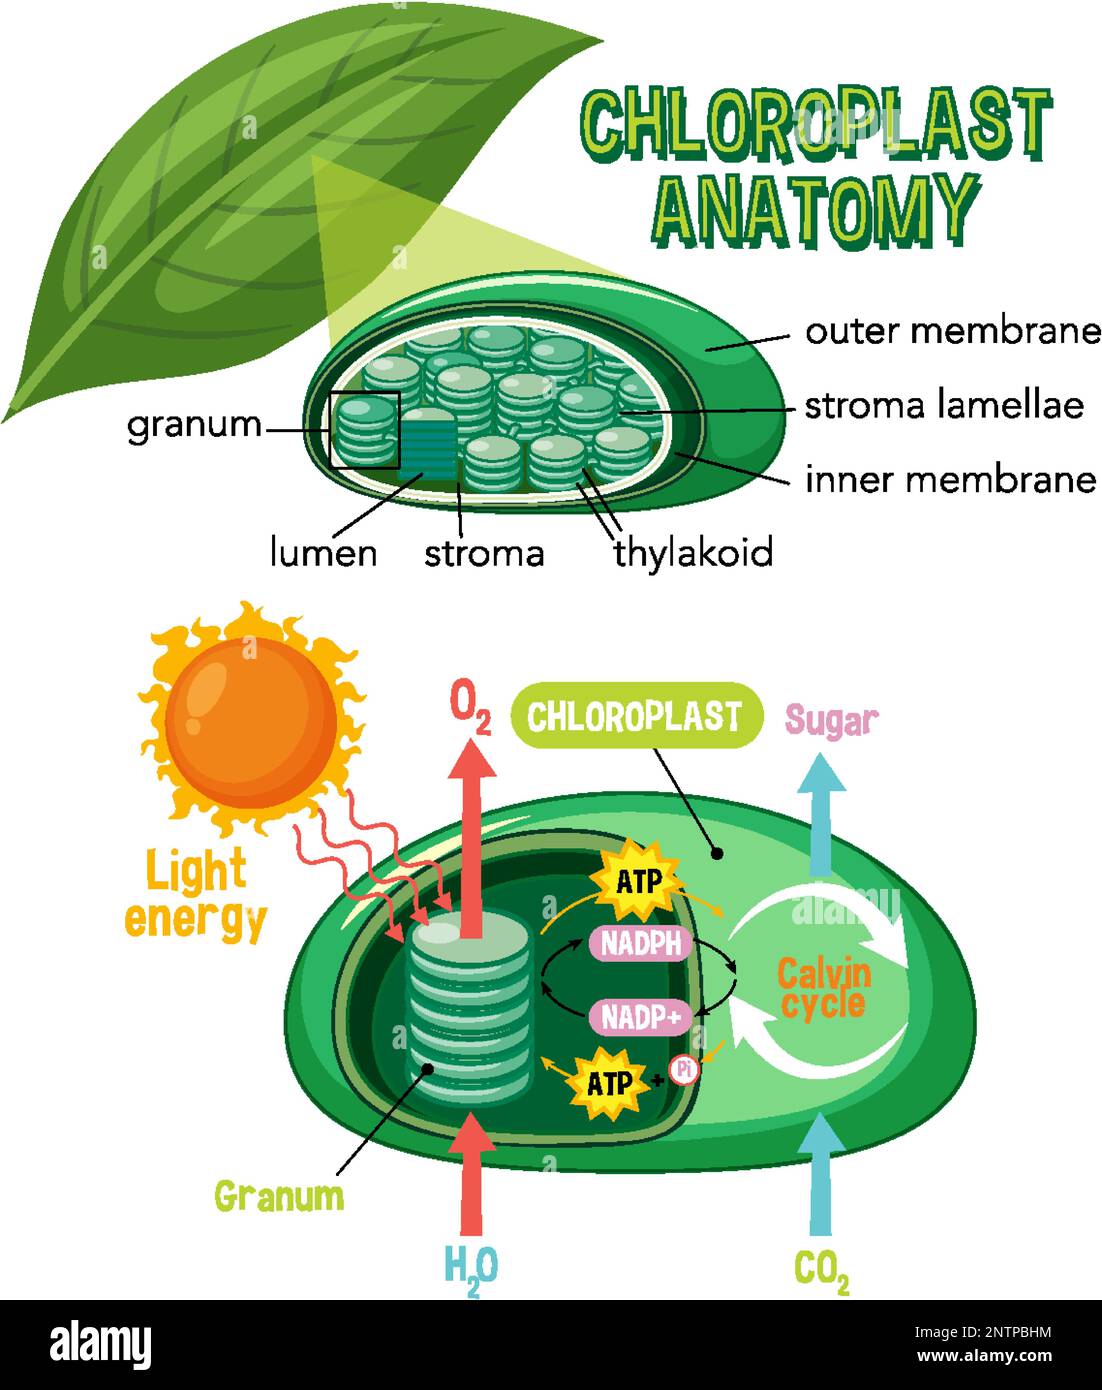 Diagram of Chloroplast Anatomy for Biology and Life Science Education illustration Stock Vector